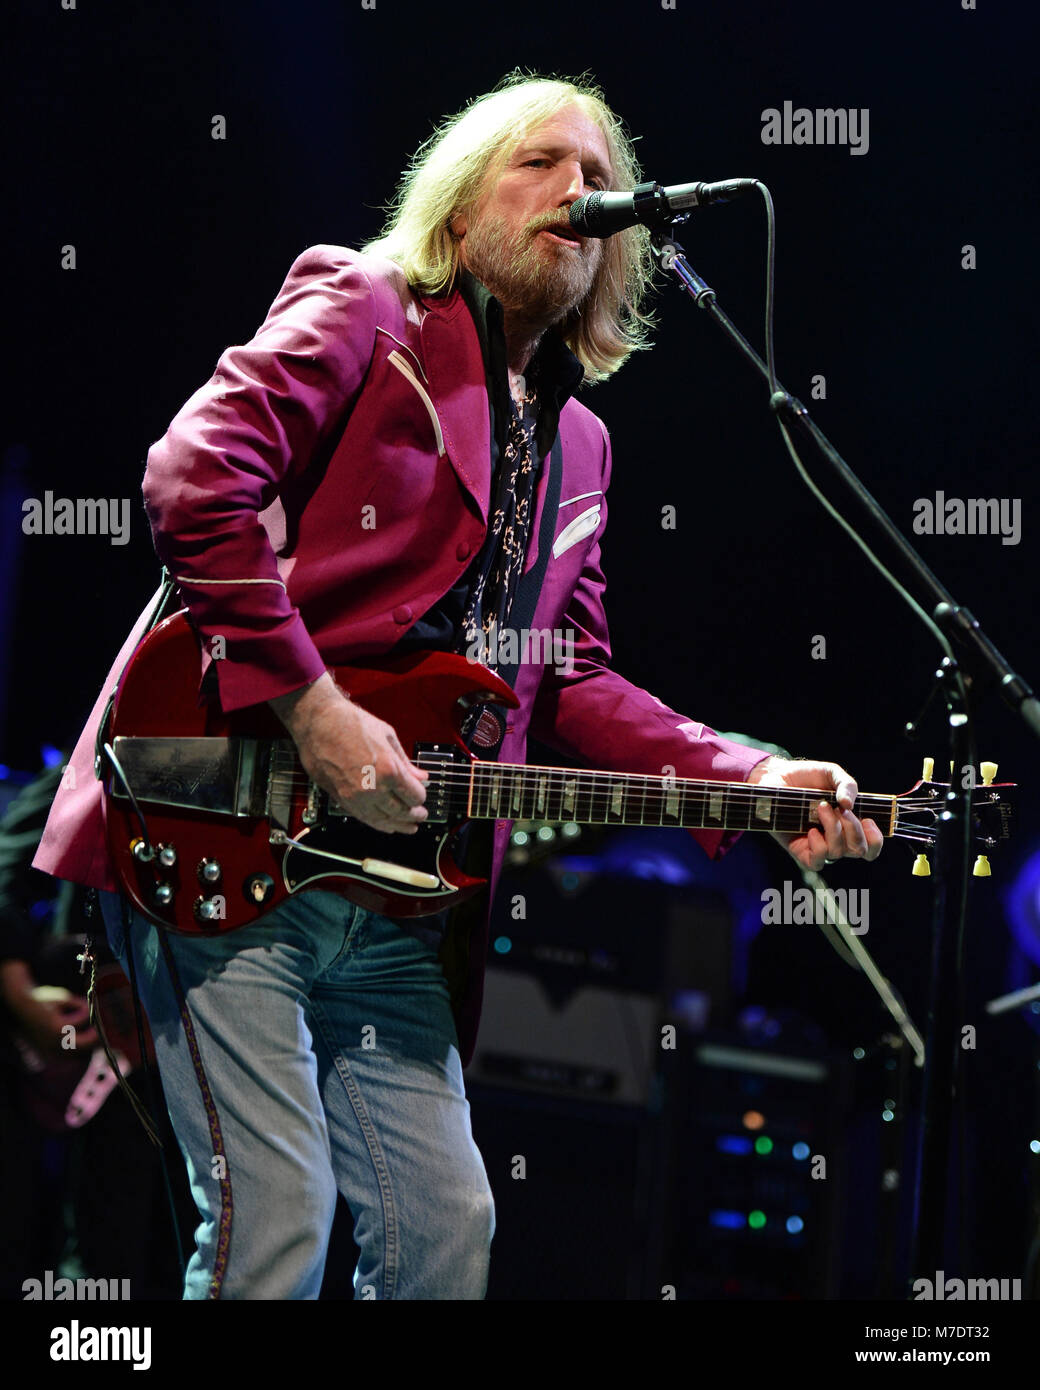 WEST PALM BEACH - SEPTEMBER 20: Tom Petty of Tom Petty and the Heartbreakers perform at the Cruzan Amphitheatre on September 20, 20  People:  Tom Petty Stock Photo